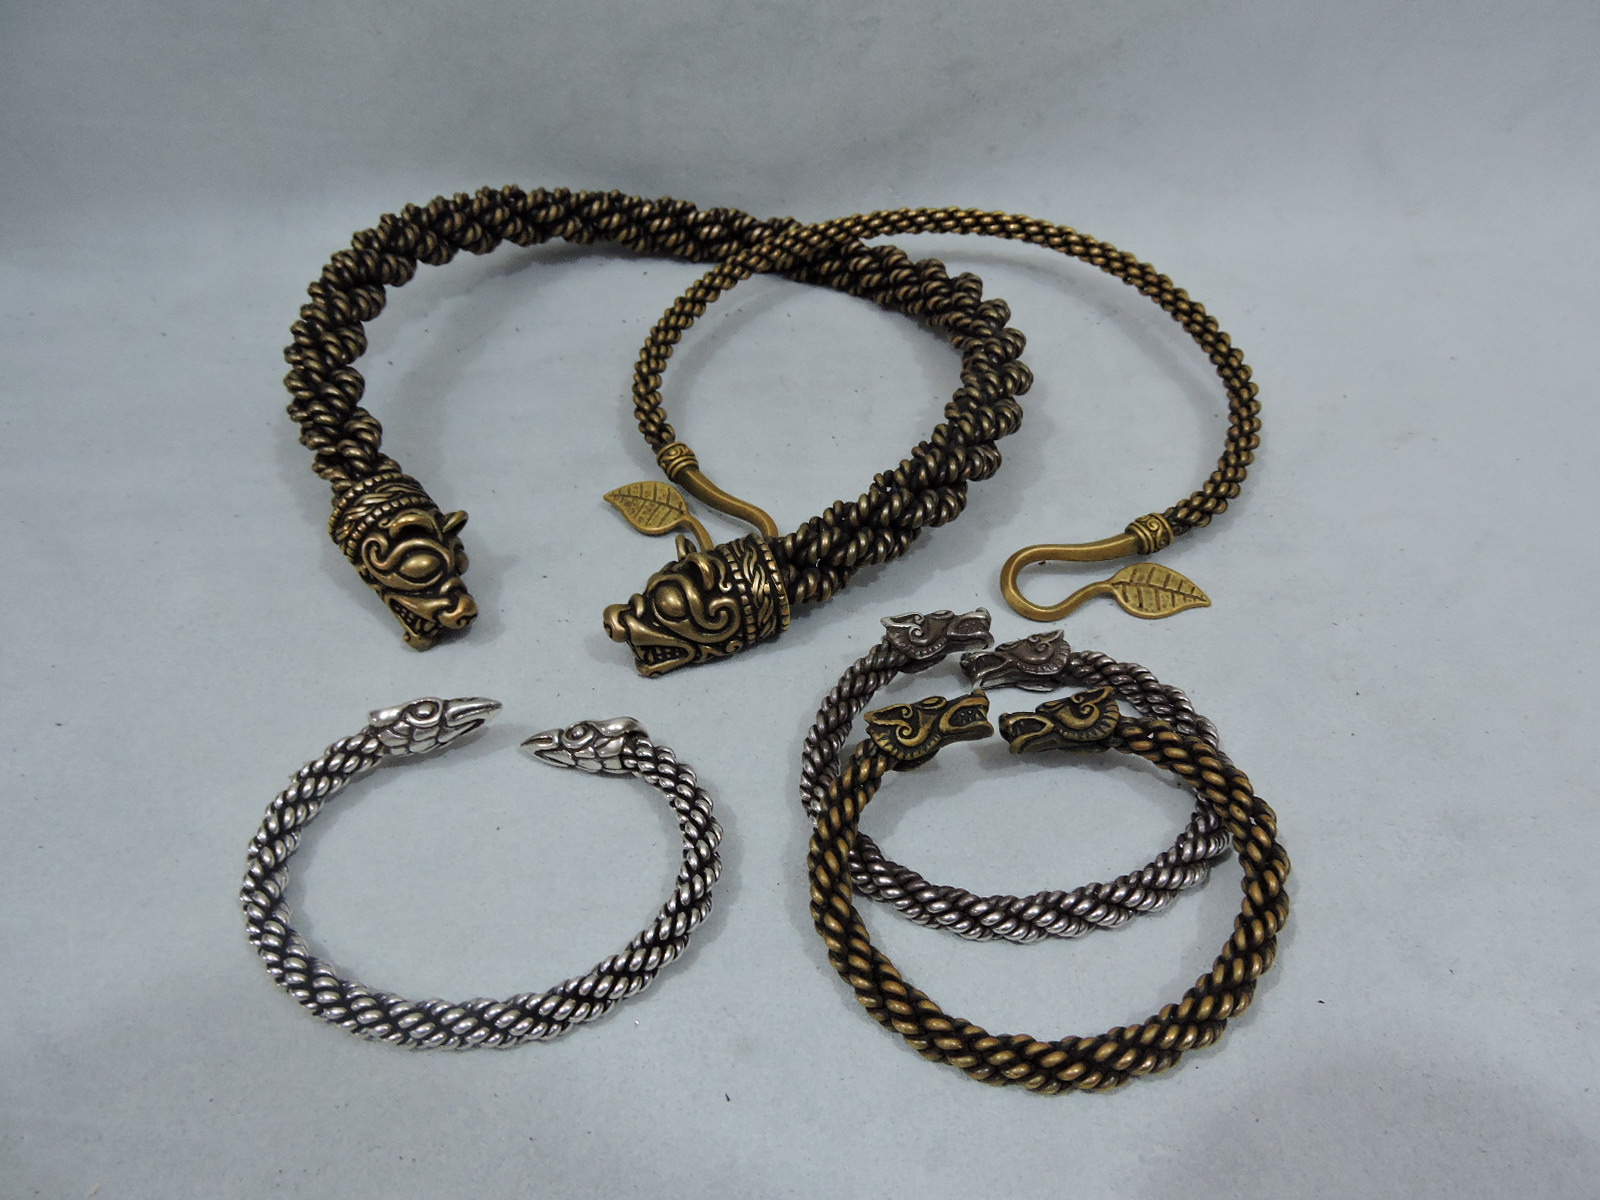 Jewelry made by Crafty Celts Official Jewelry Maker for History Channel's Vikings.
The Silver Raven Bracelet is the same as those given to Ragnar's s